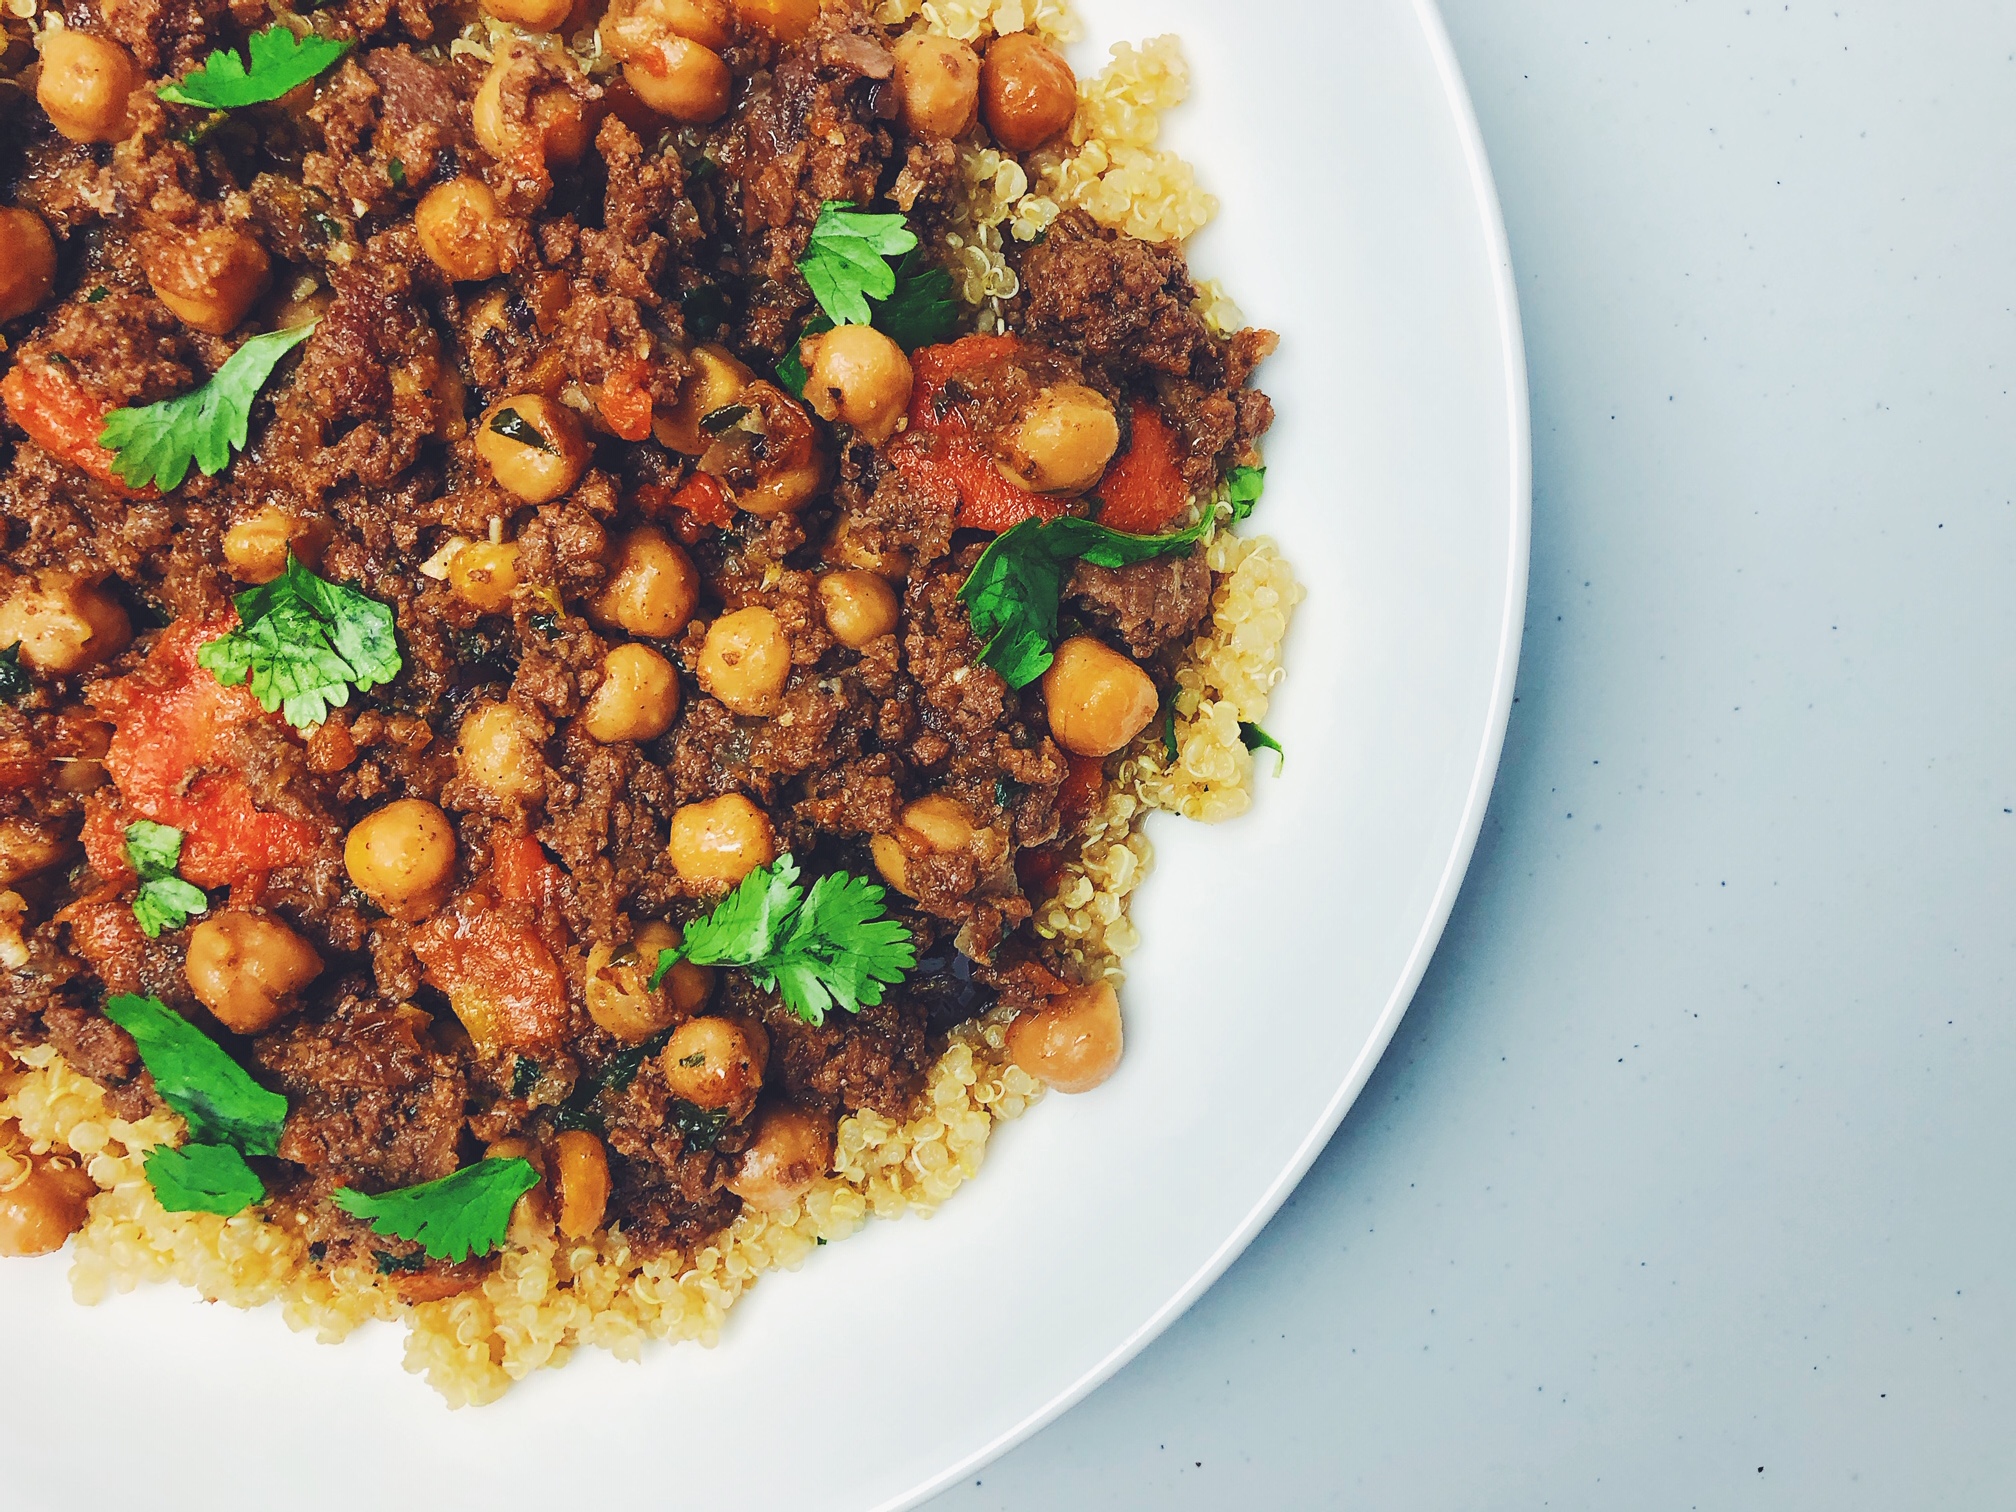 Moroccan Inspired Ground Beef Stew